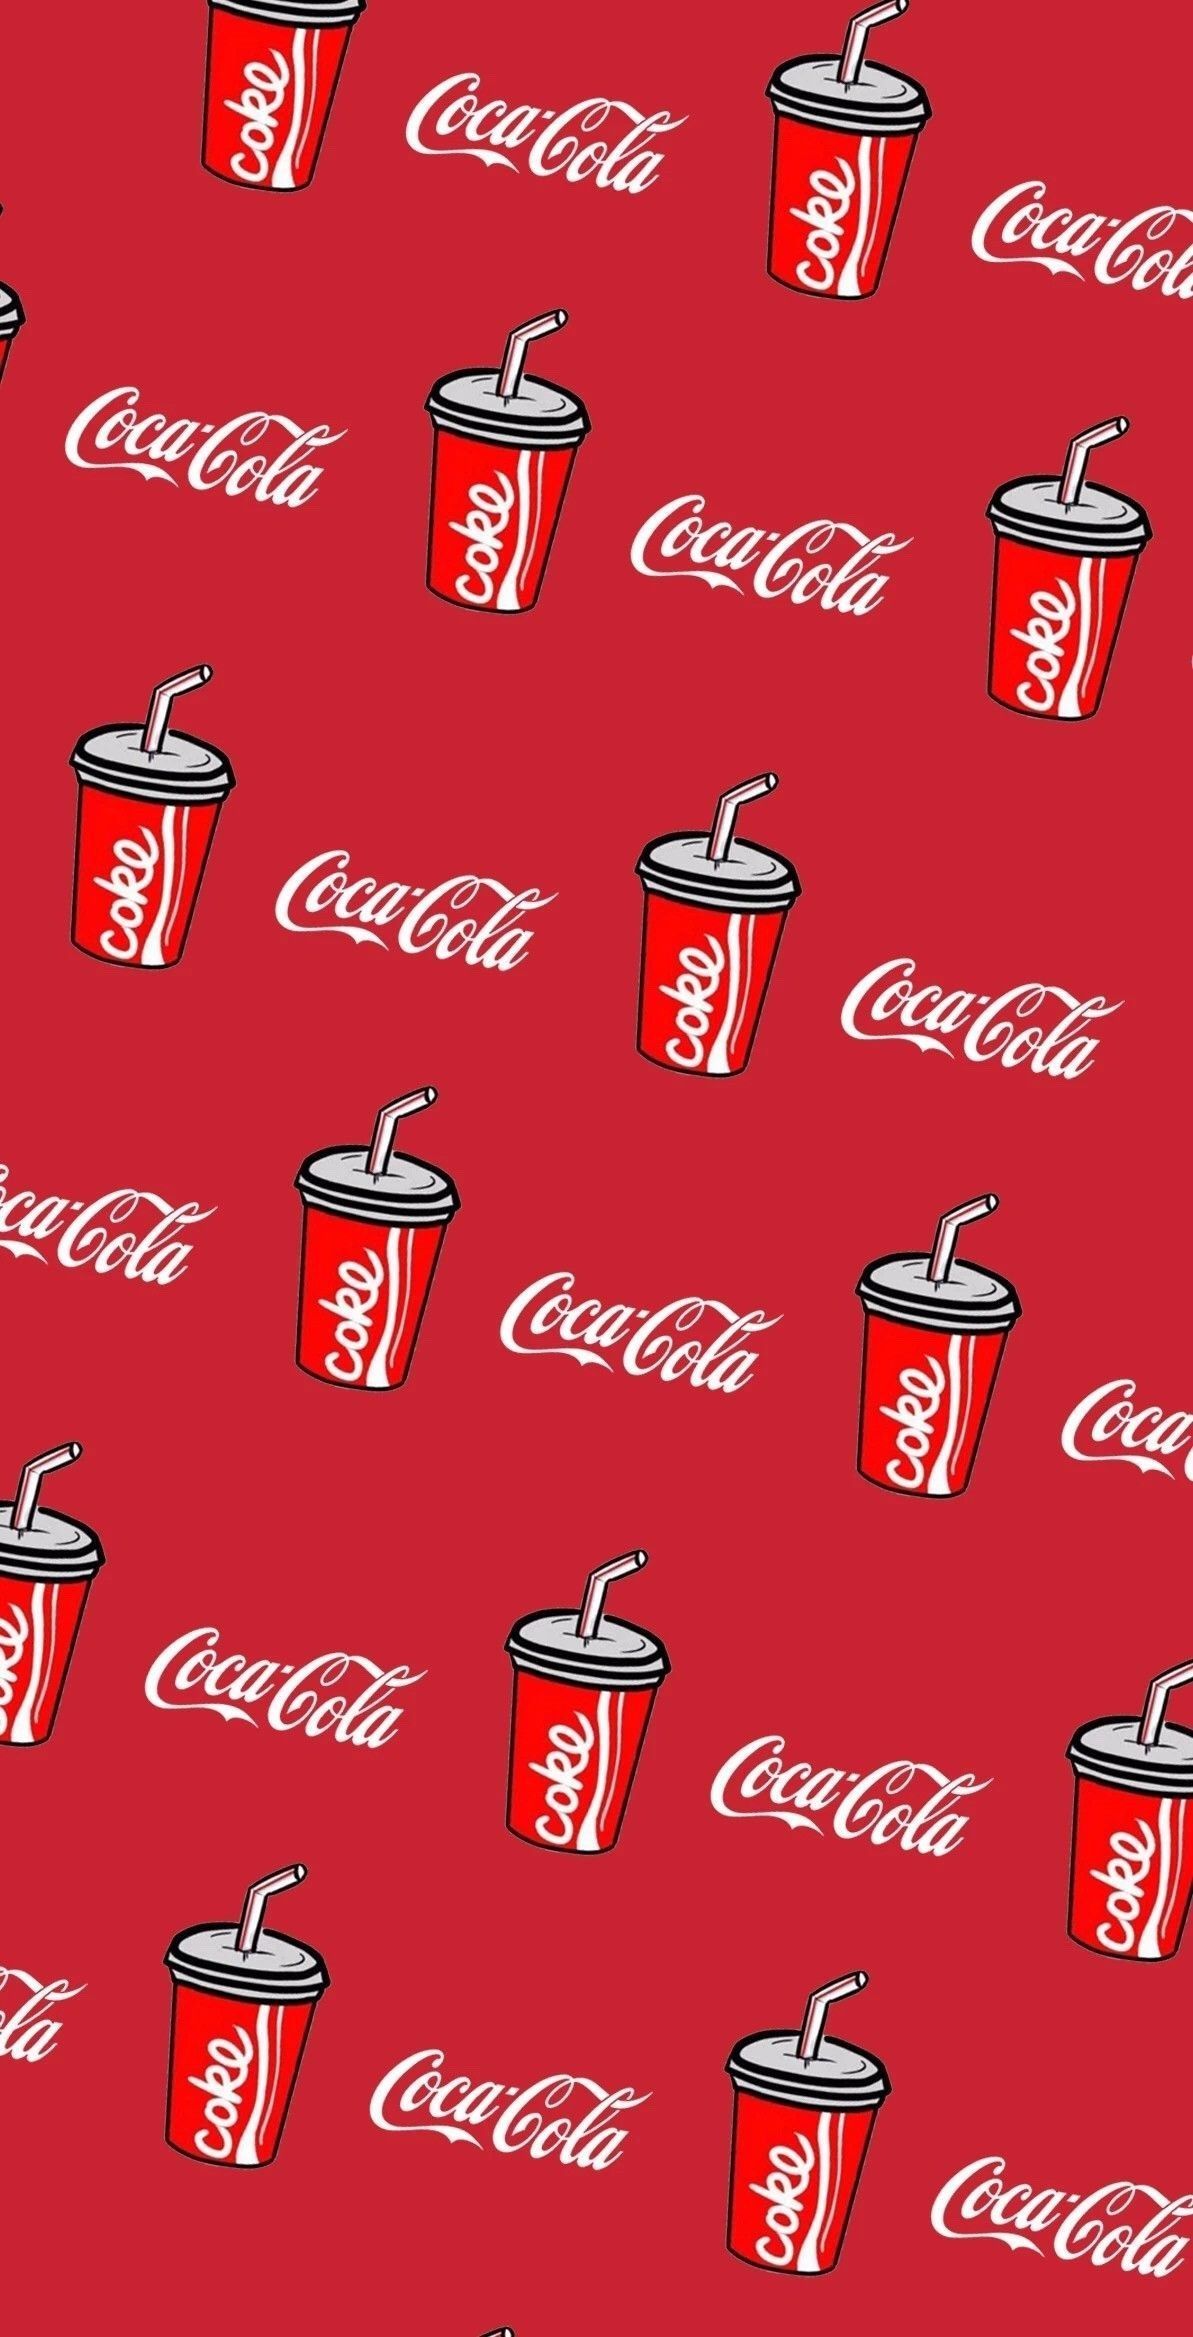 CocaCola. Wallpaper iphone cute, Hypebeast wallpaper, Aesthetic iphone wallpaper